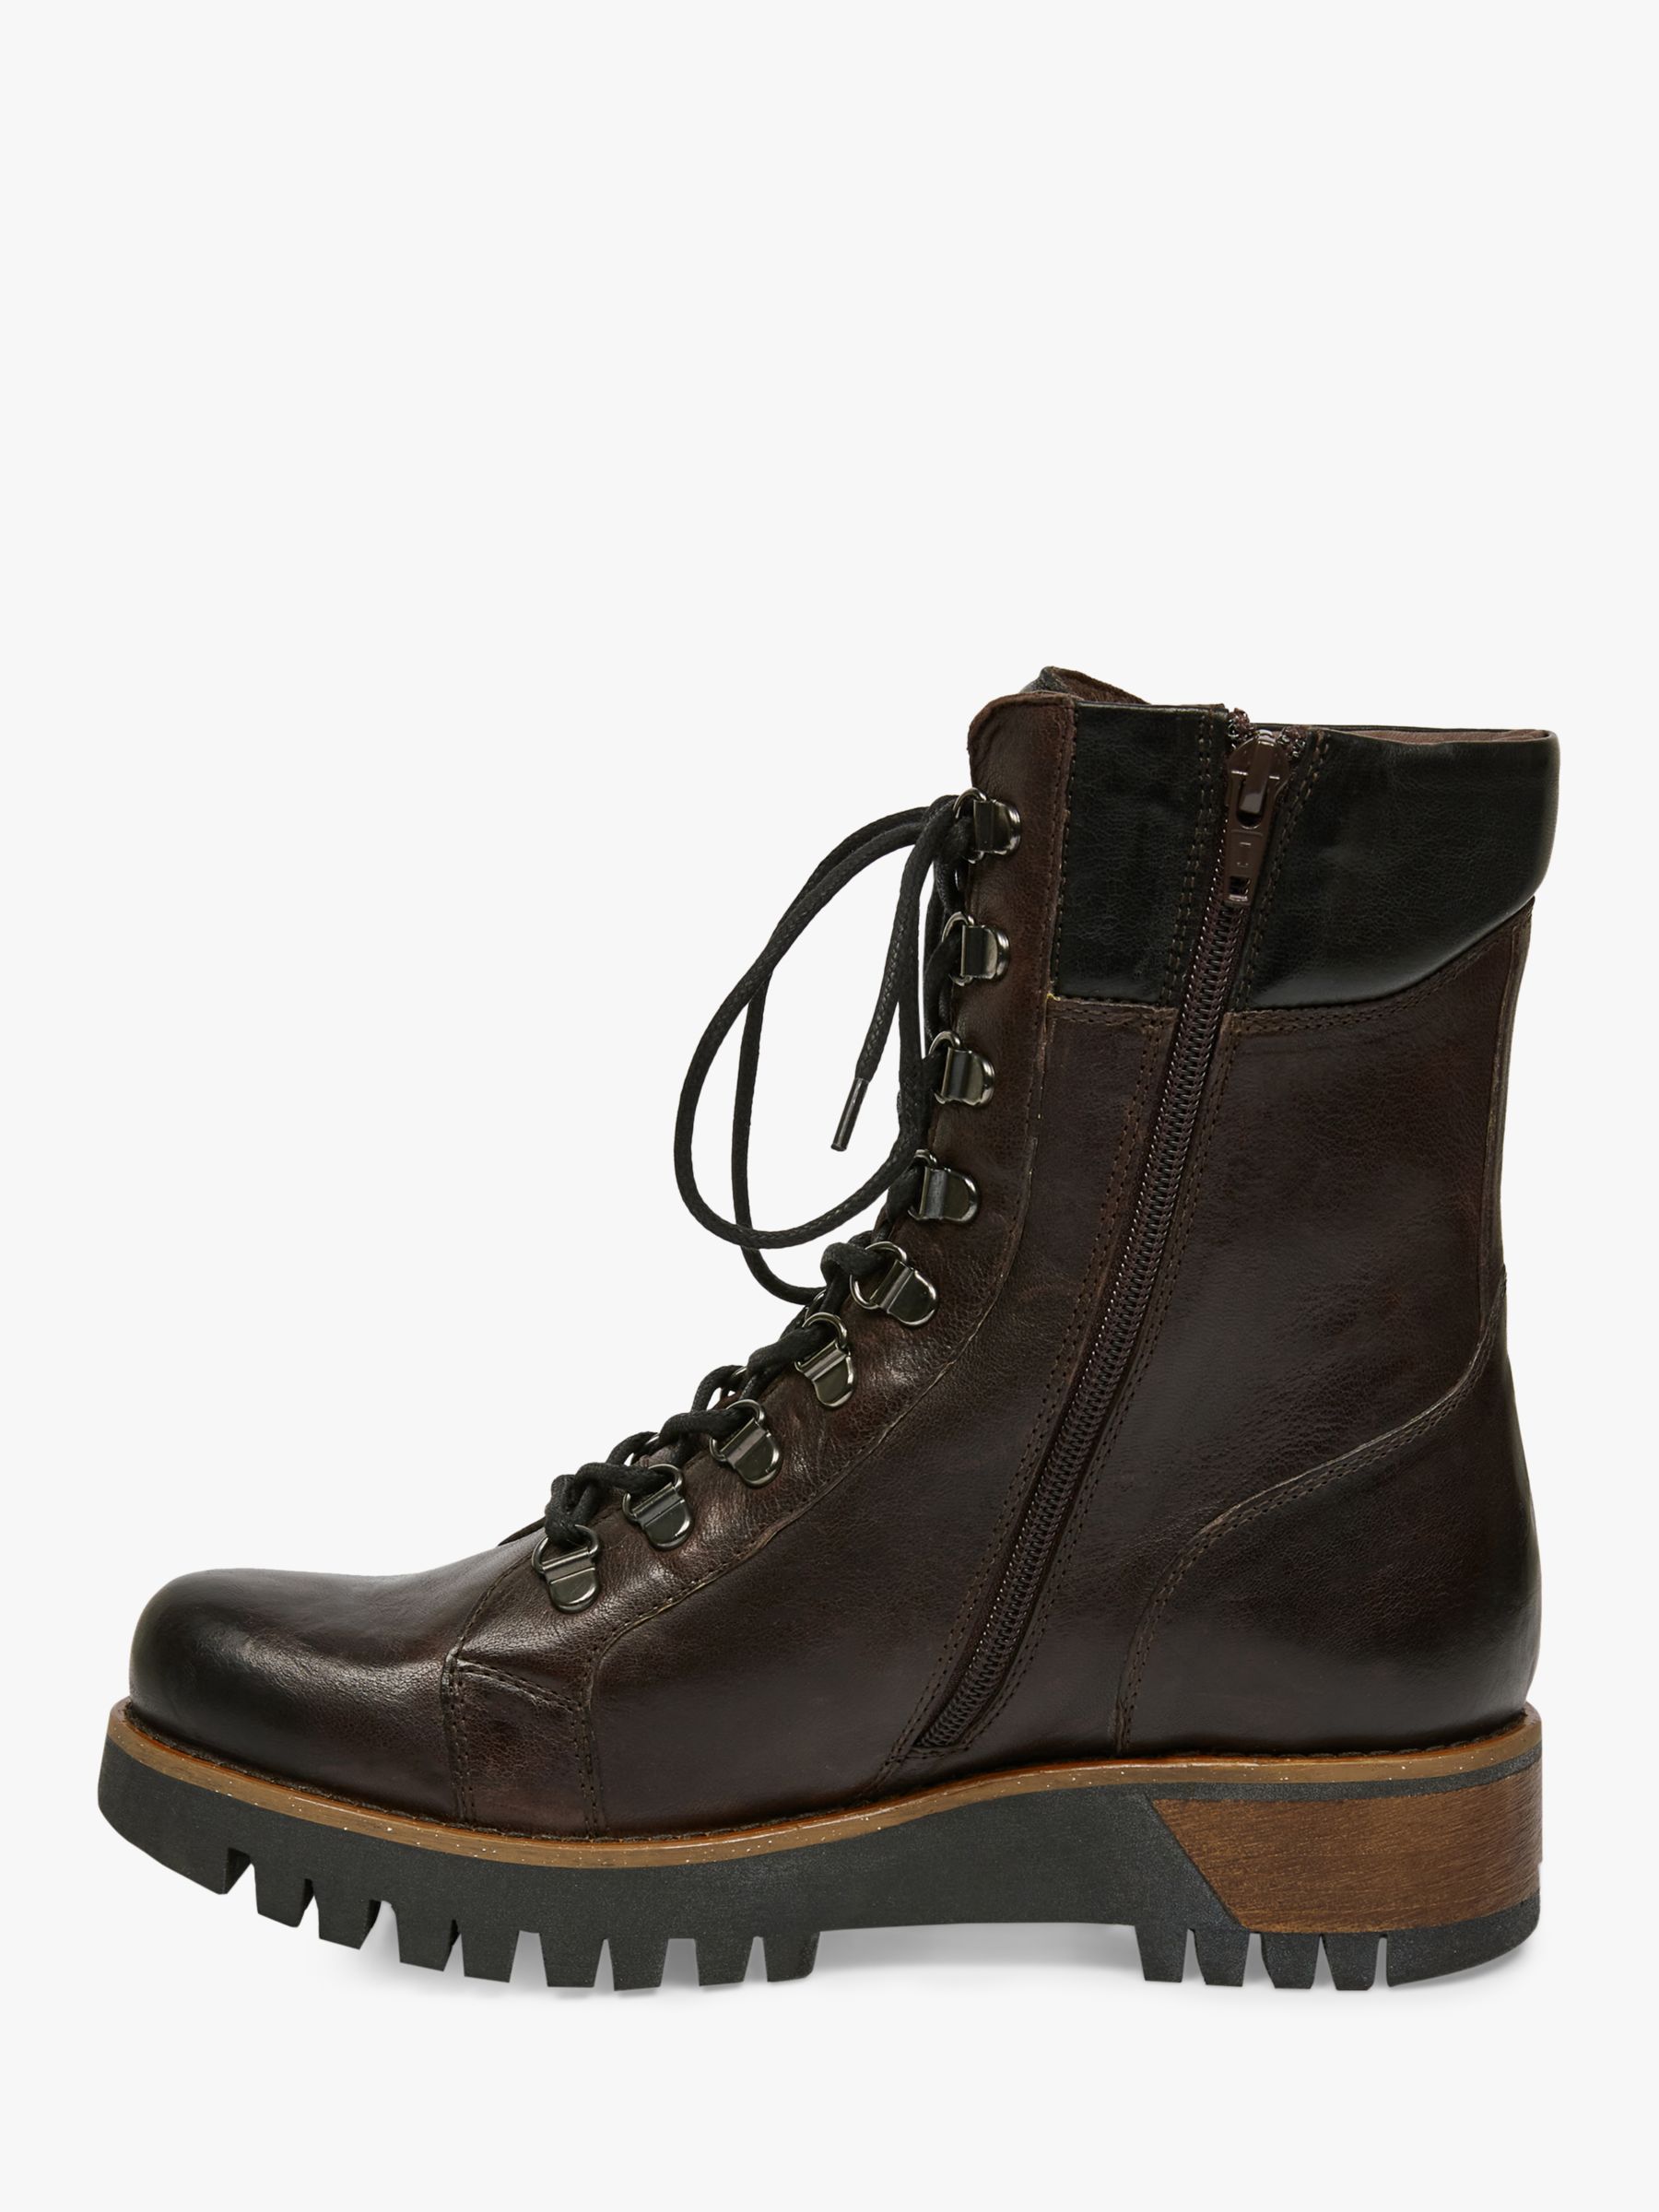 Celtic & Co. Wilds Leather Lace Up Boots, Tanners Brown at John Lewis ...